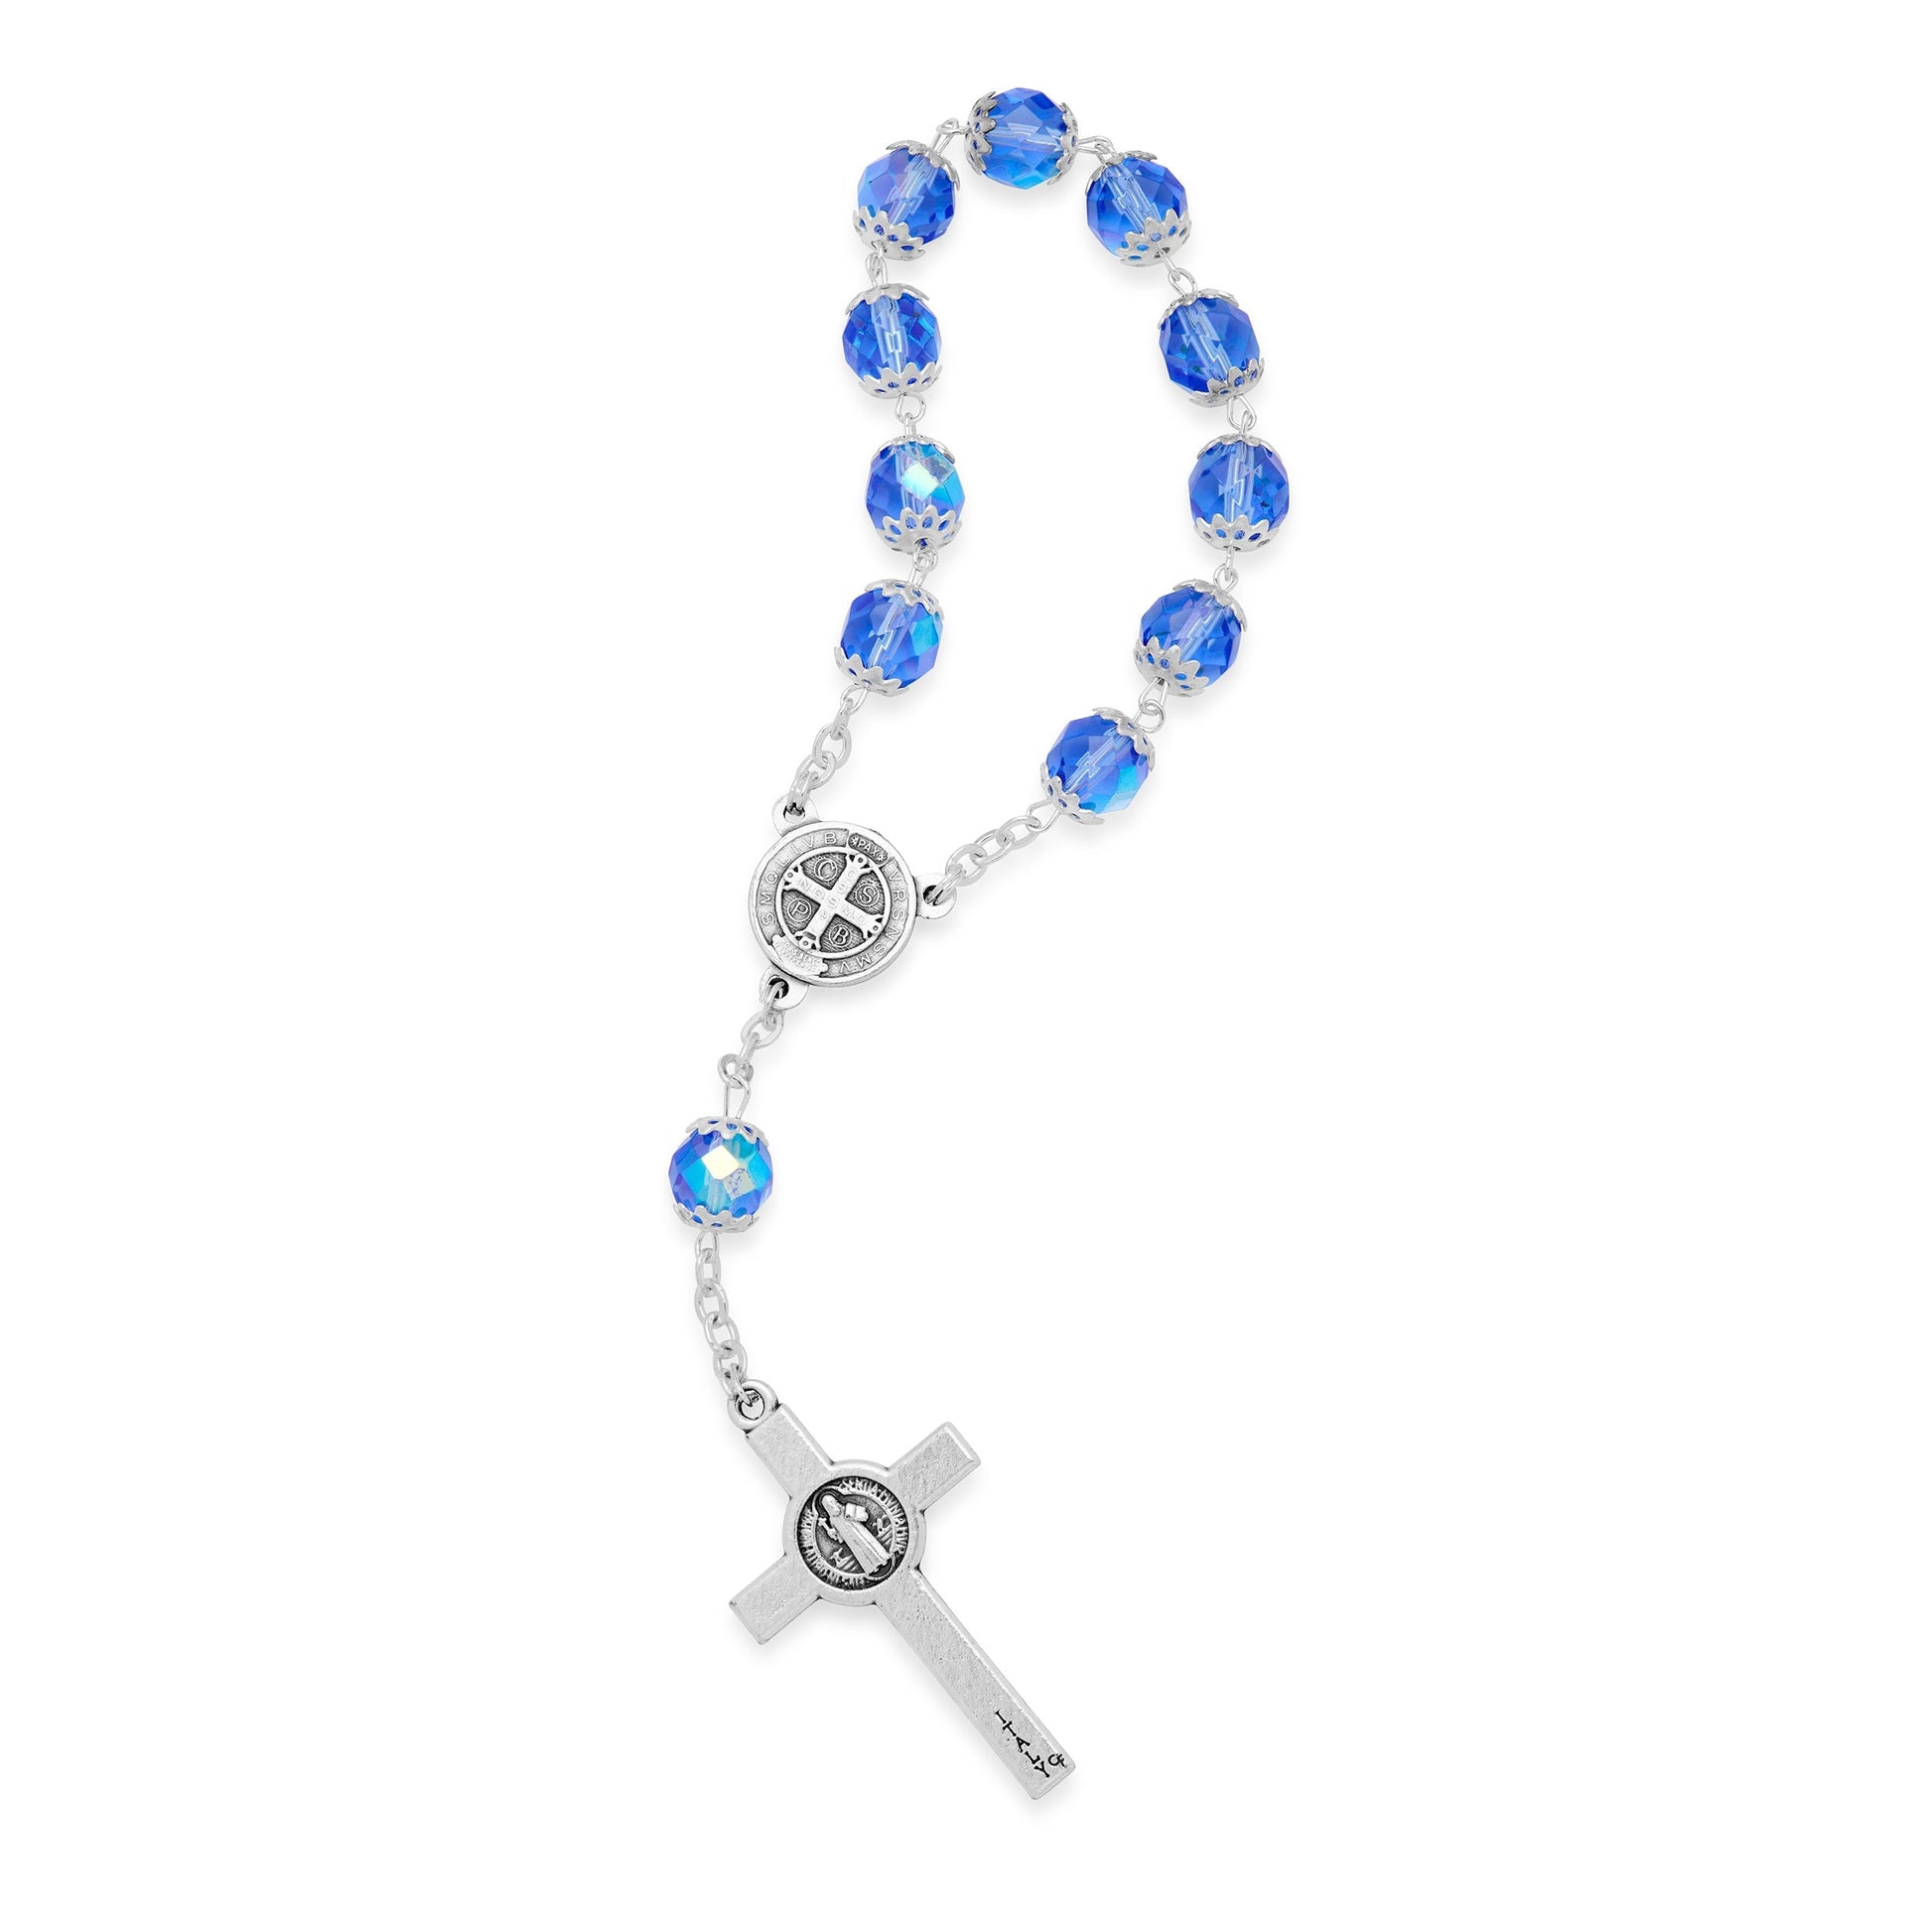 MONDO CATTOLICO Prayer Beads 8 mm (0.31 in) Metal St. Benedict Decade Rosary With Sapphire Tangled Beads